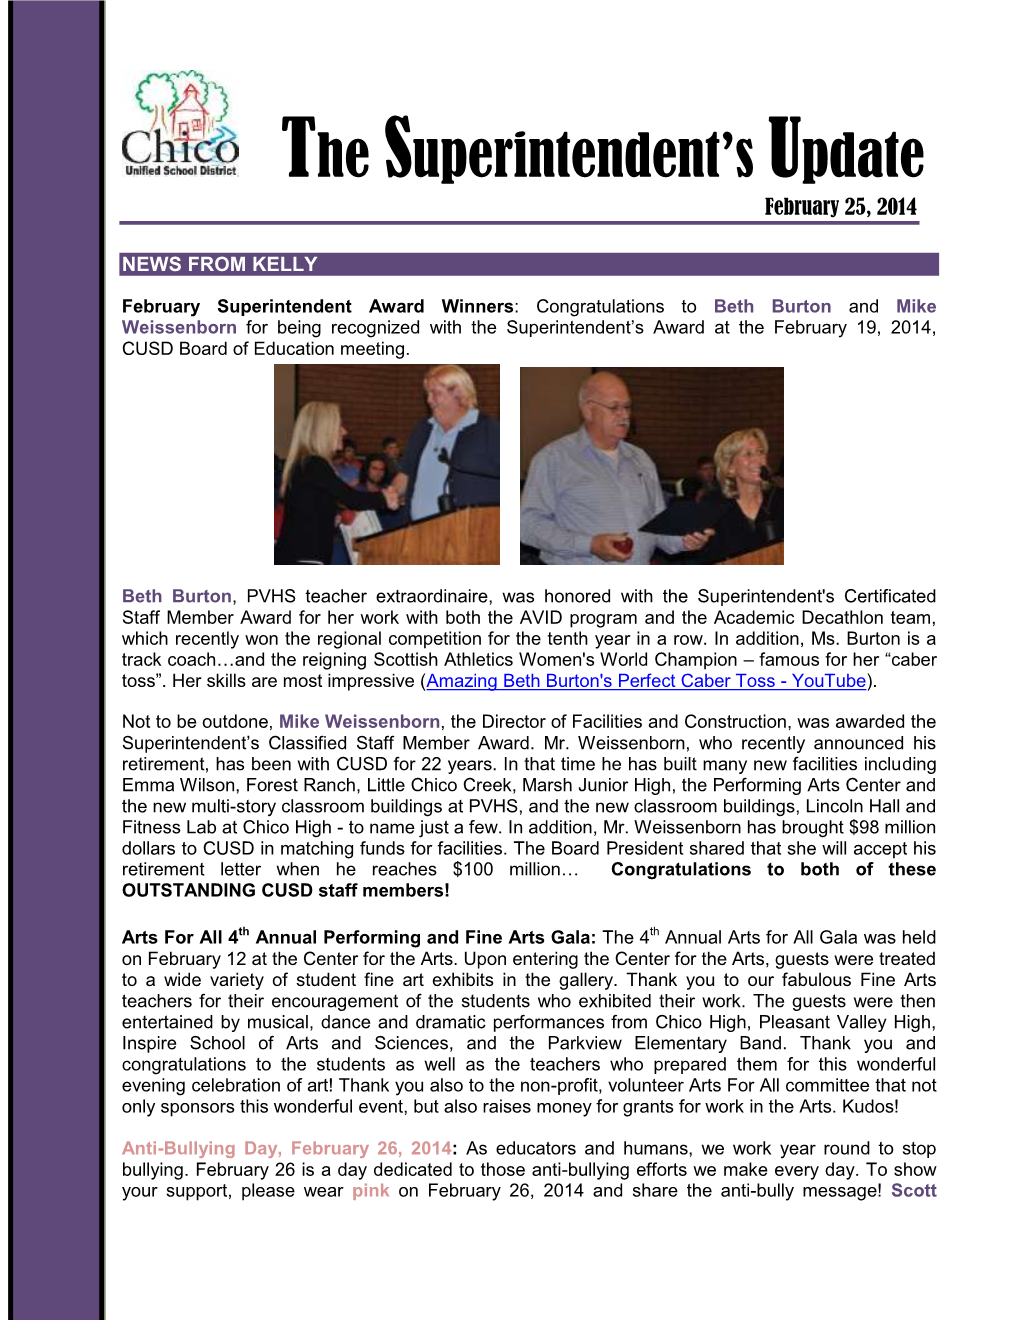 The Superintendent's Update